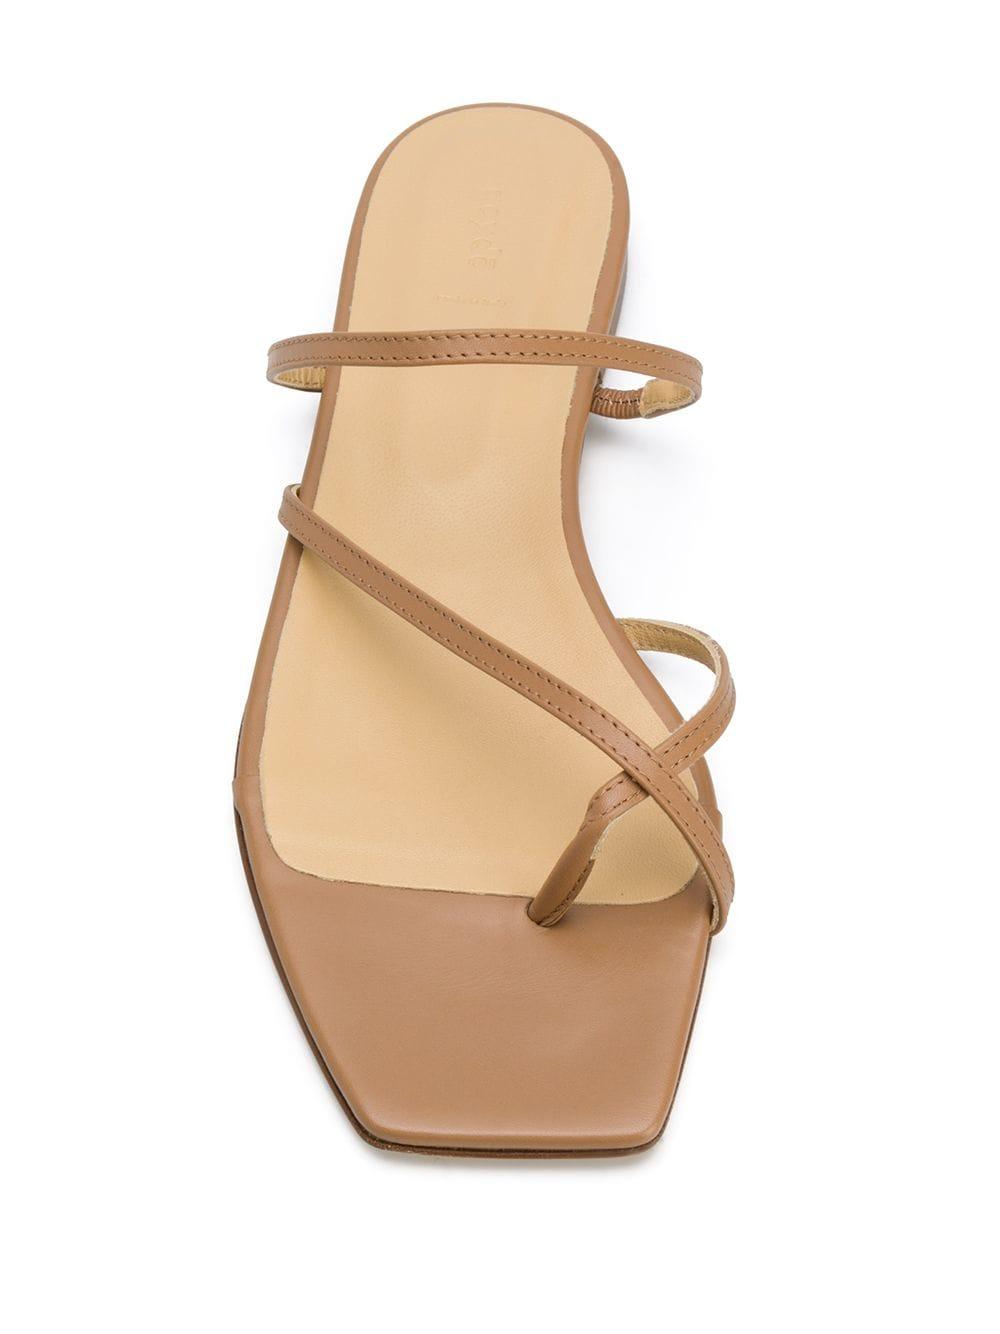 Aeyde Leather Marina Strappy Sandals in Natural - Lyst